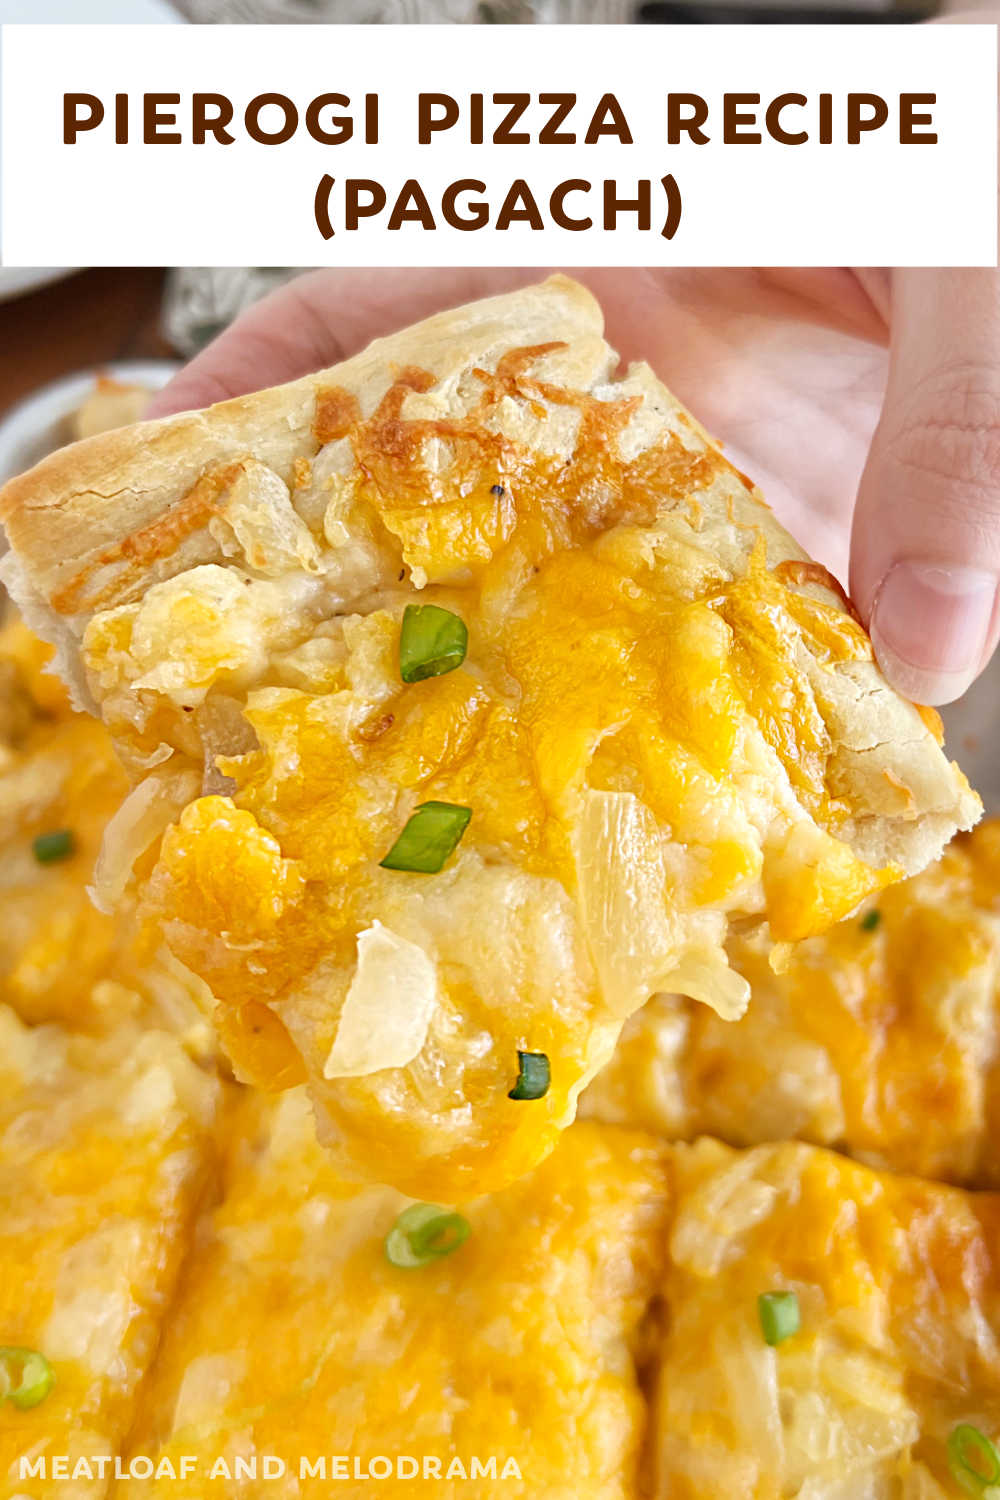 This Pierogi Pizza Recipe (Pagach) is made with pizza dough topped with cheesy potato filling, onions and cheddar cheese. Tastes just like pierogi! This easy recipe is a great way to enjoy the taste of Pittsburgh pierogies without the work! via @meamel